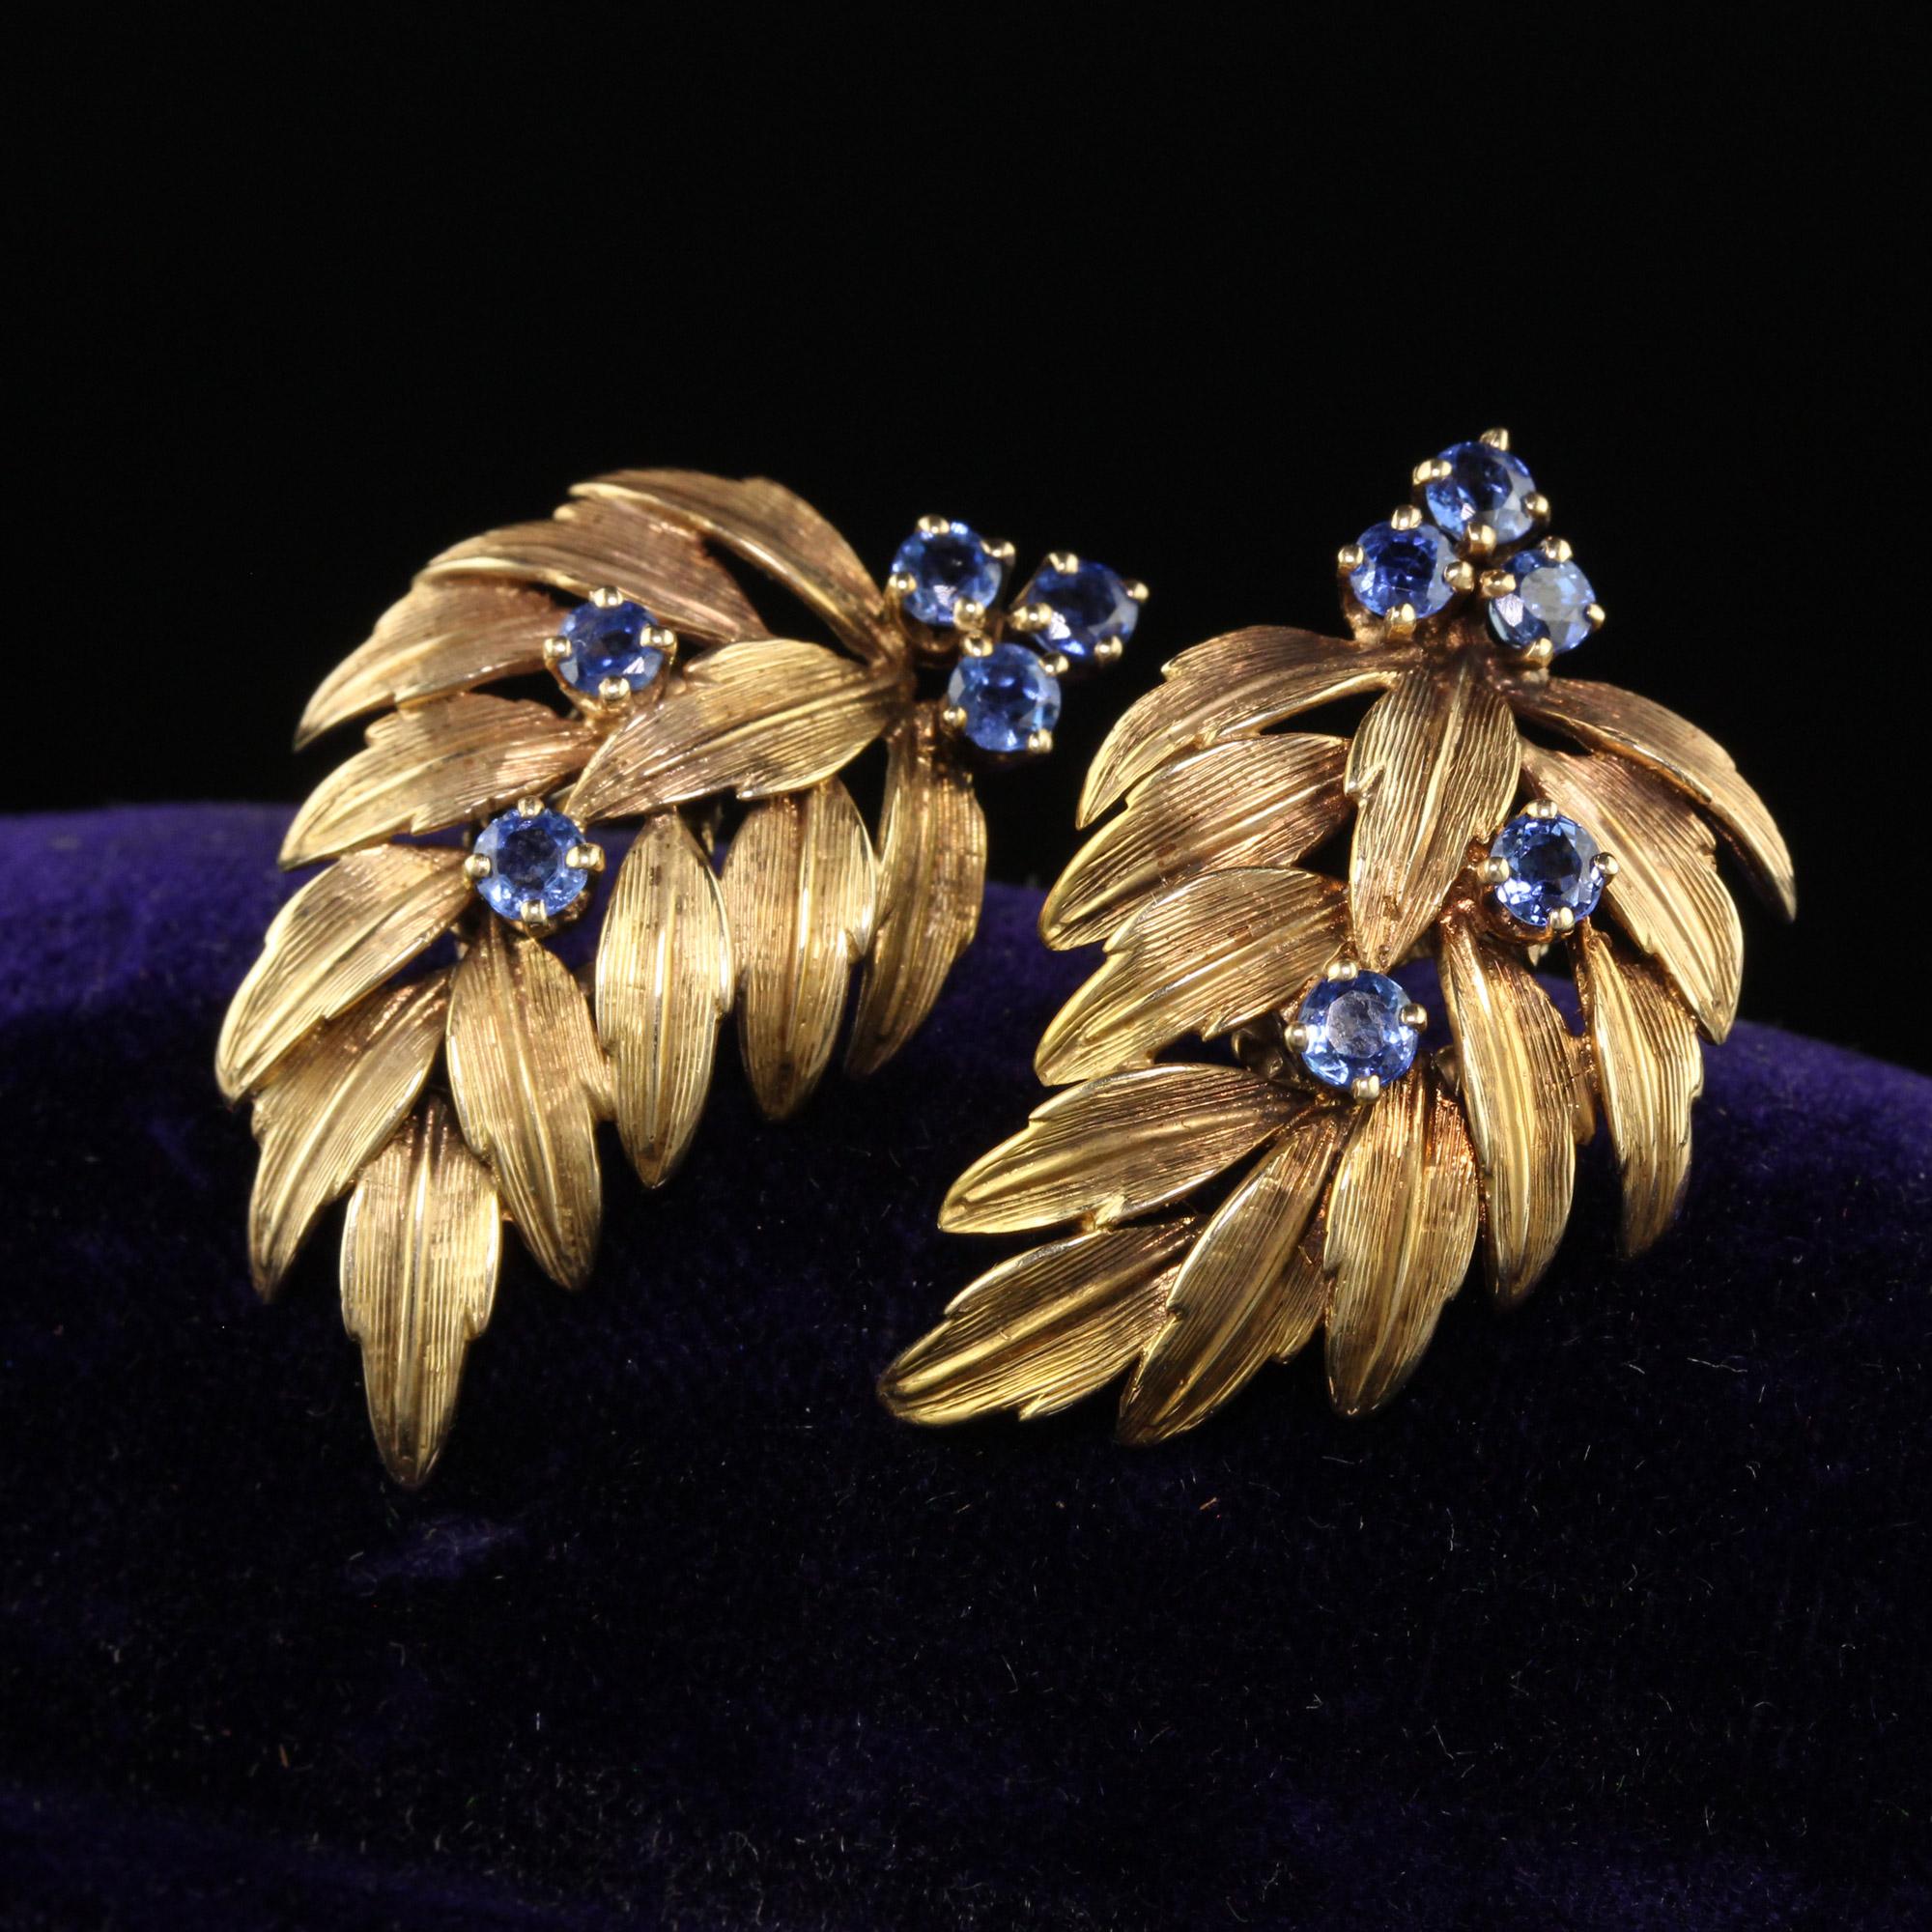 Beautiful Vintage Estate Dankner 14K Yellow Gold Sapphire Leaf Earrings. This beautiful pair of earrings are crafted in 14k yellow gold. The earrings are hallmarked by Henry Dankner and has a beautiful leaf design. The sapphires are natural and have